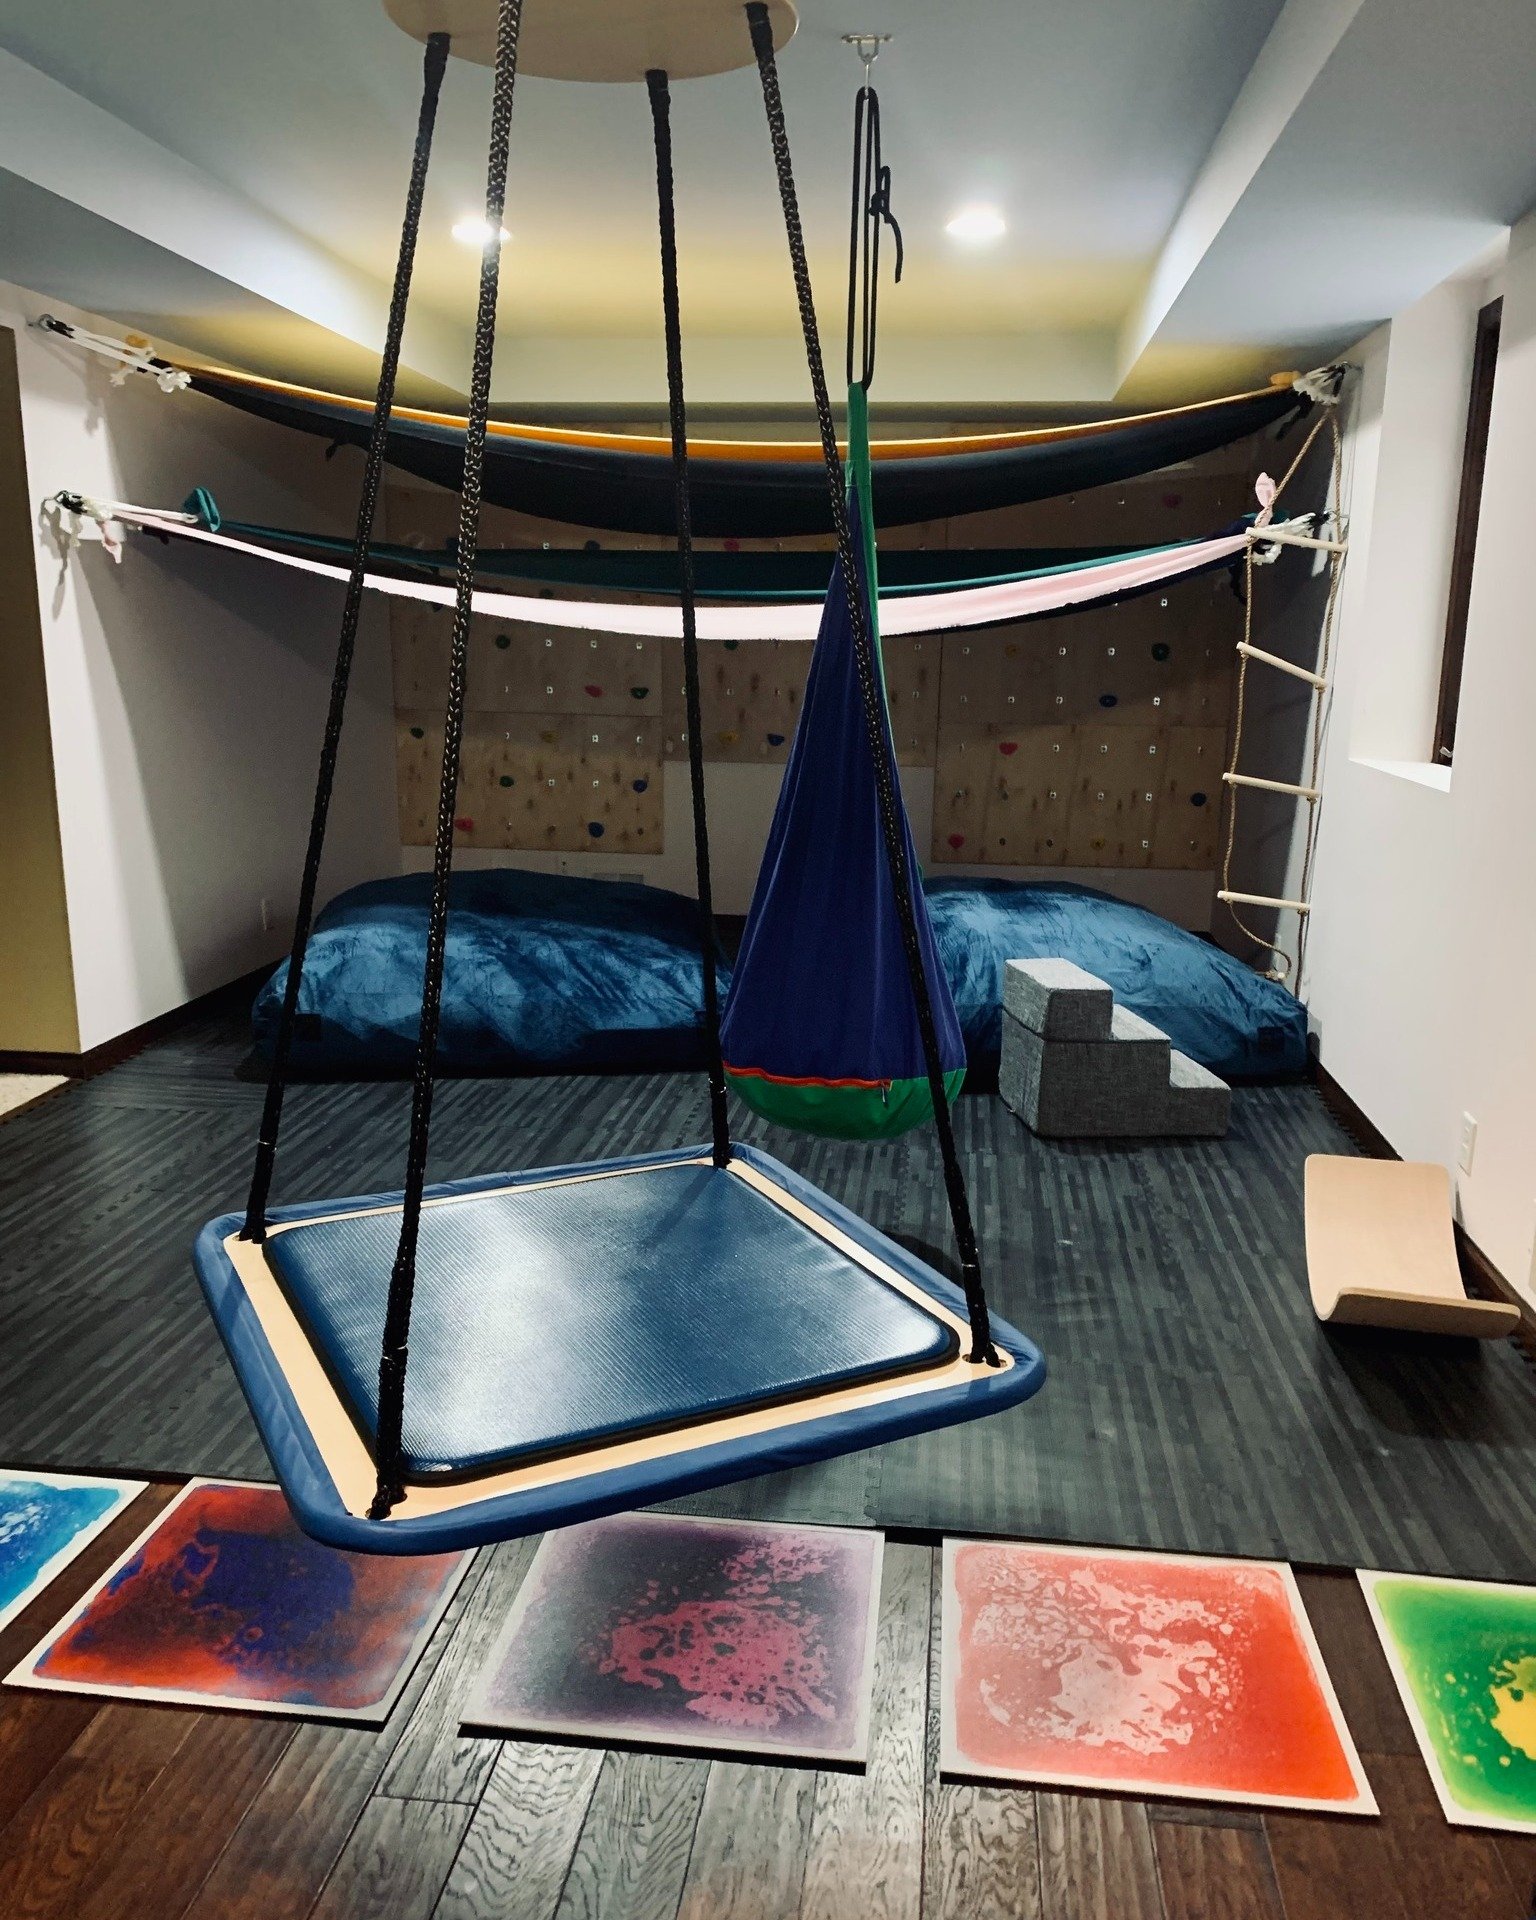 Check out this SENSE-ational sensory space! 🤩

Children seeking proprioceptive and vestibular sensory input benefit from climbing, crashing, swinging, and spinning. Adding elements like swings, lycra suspensions, or rock walls provides opportunities